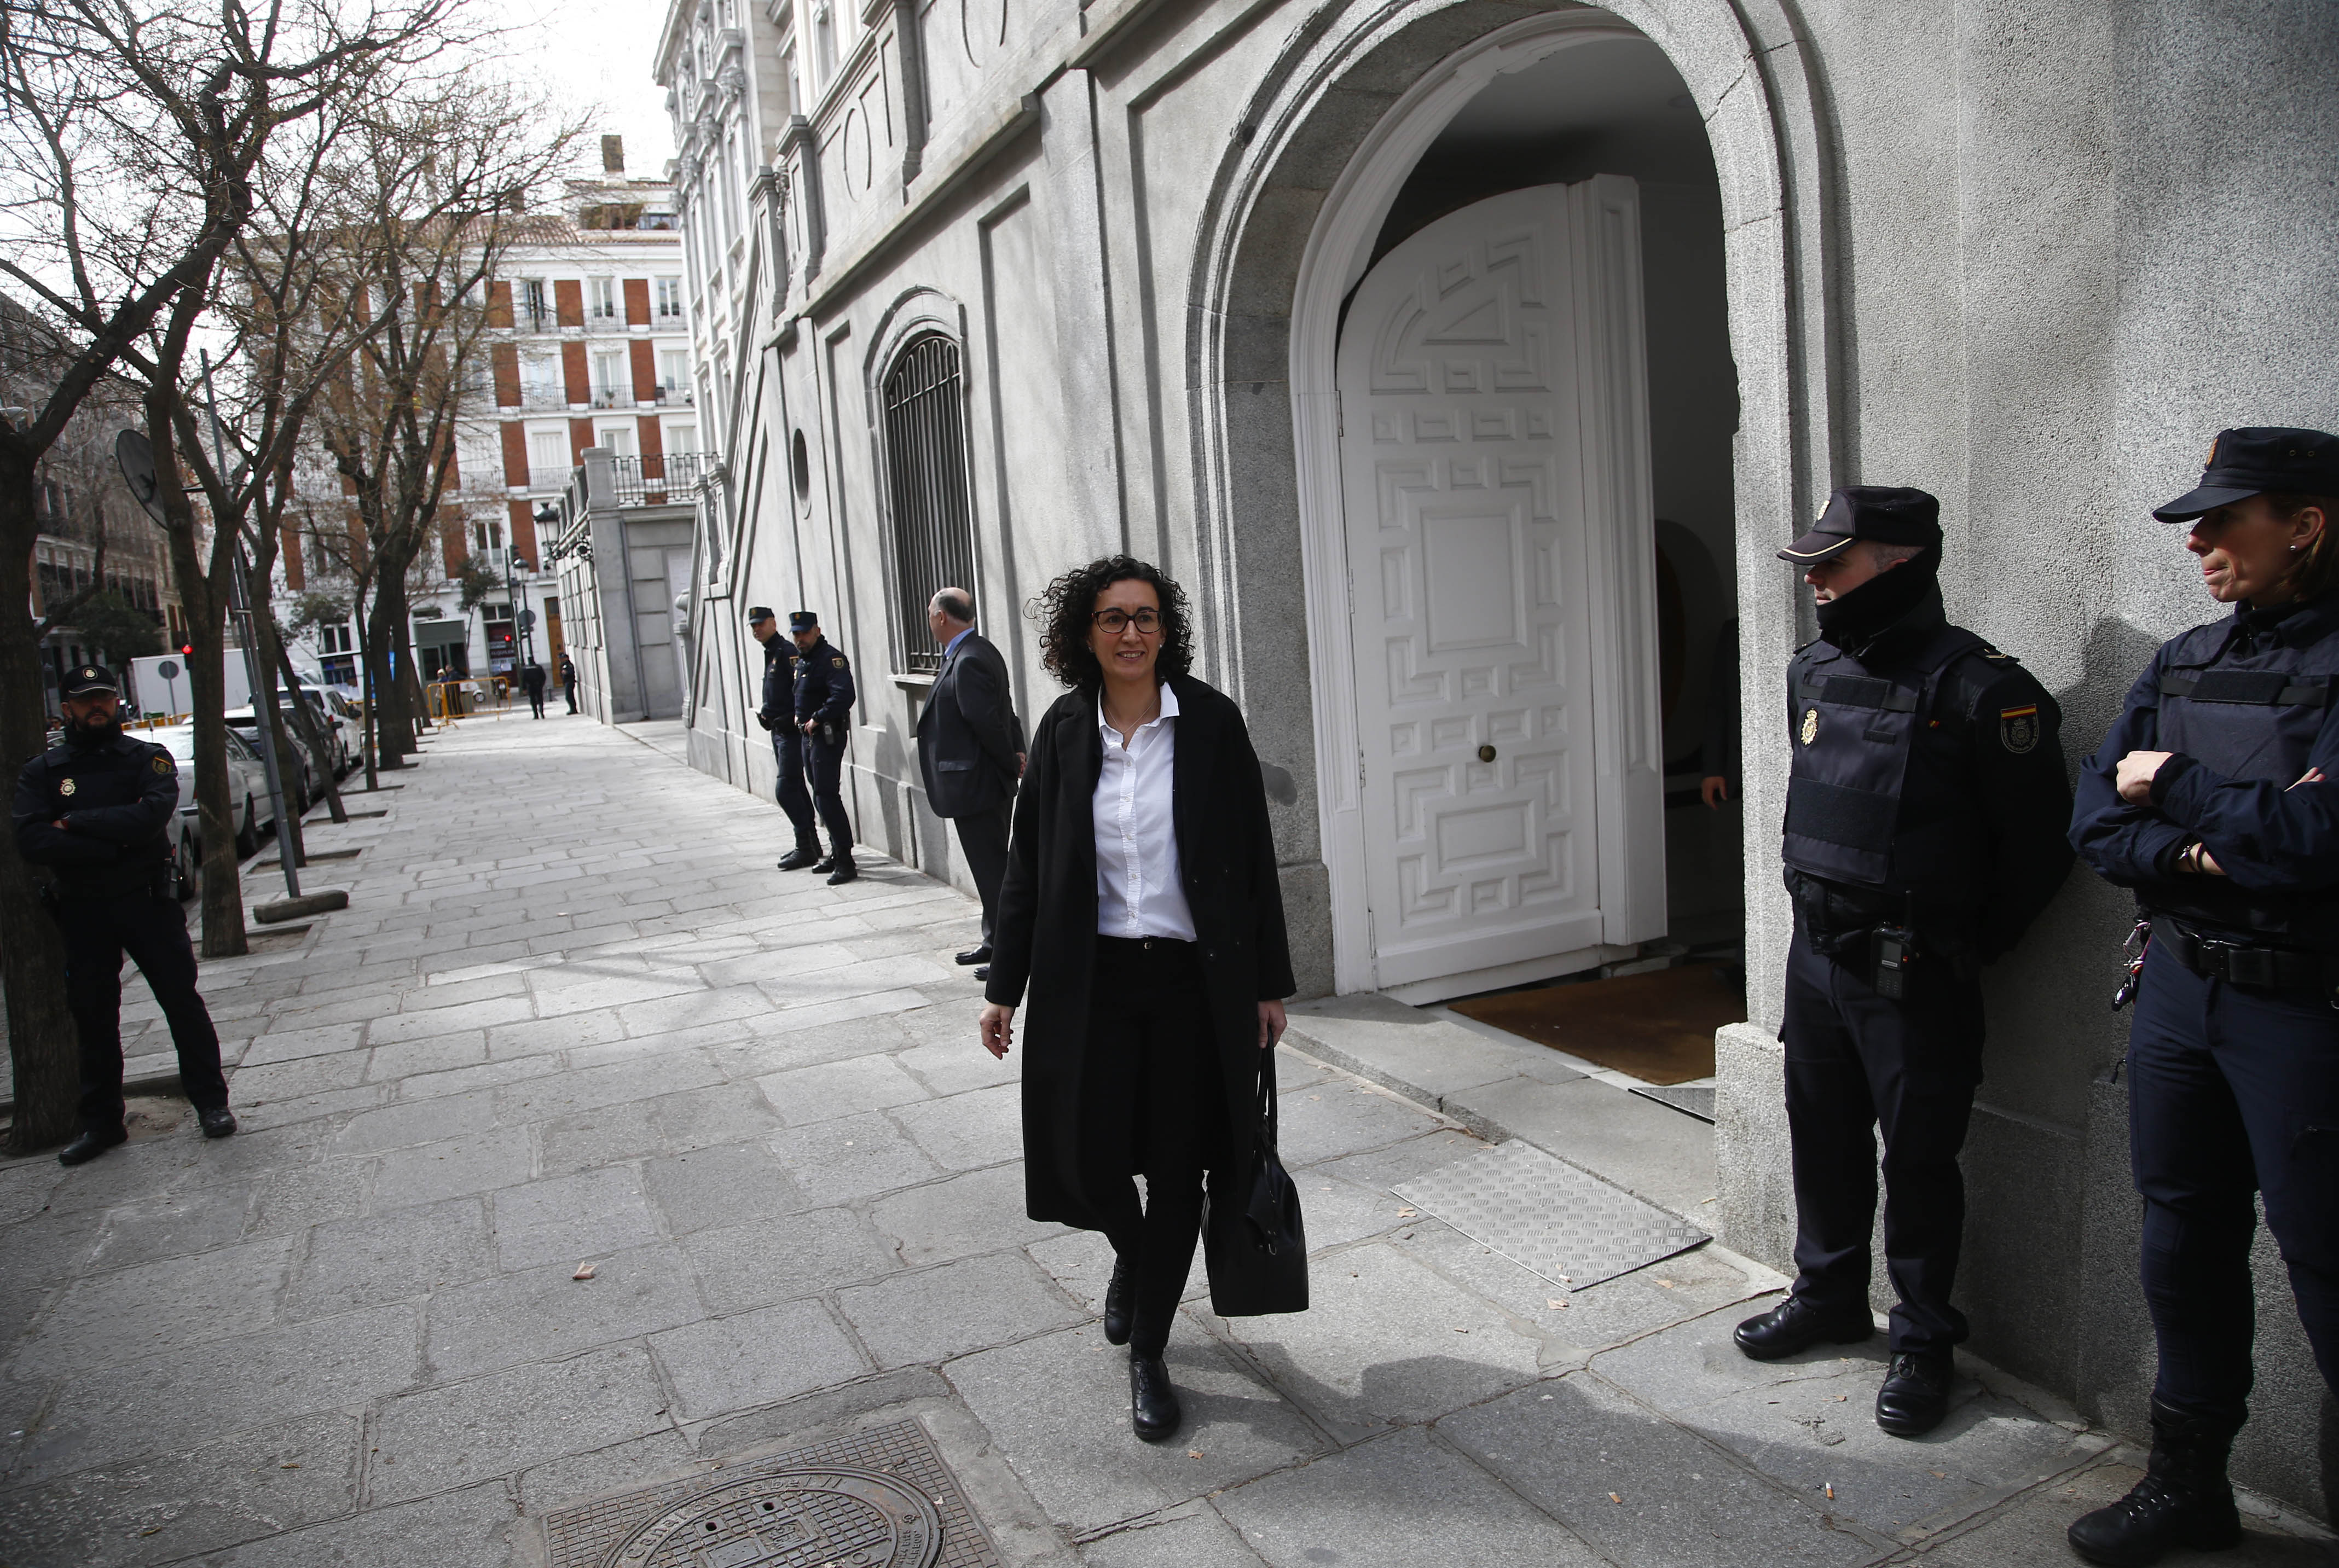 Esquerra Republicana's leader Marta Rovira after her hearing at the Supreme Court (by Javier Barbancho)